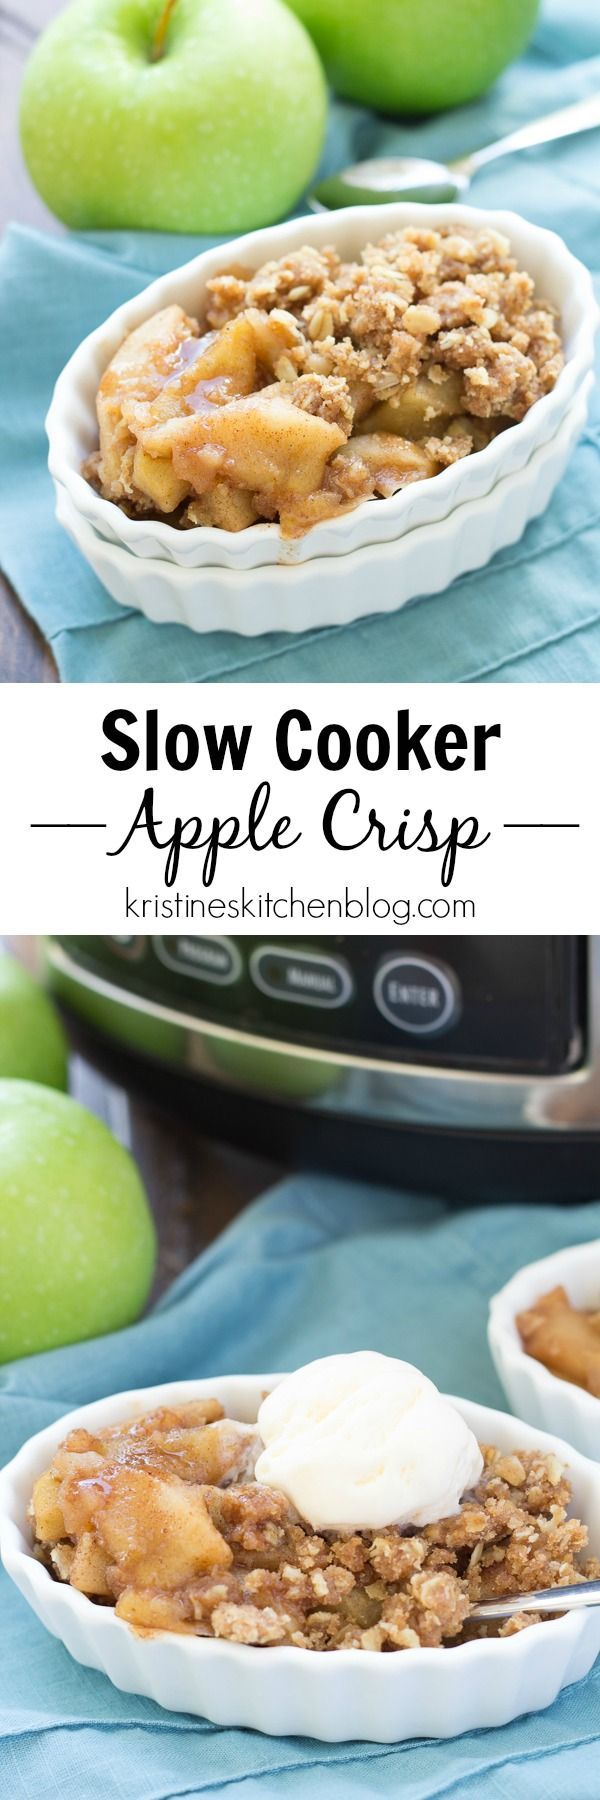 Easy Slow Cooker Apple Crisp, made completely in the crock pot! Juicy, spiced caramel apple filling plus lots of buttery crumble